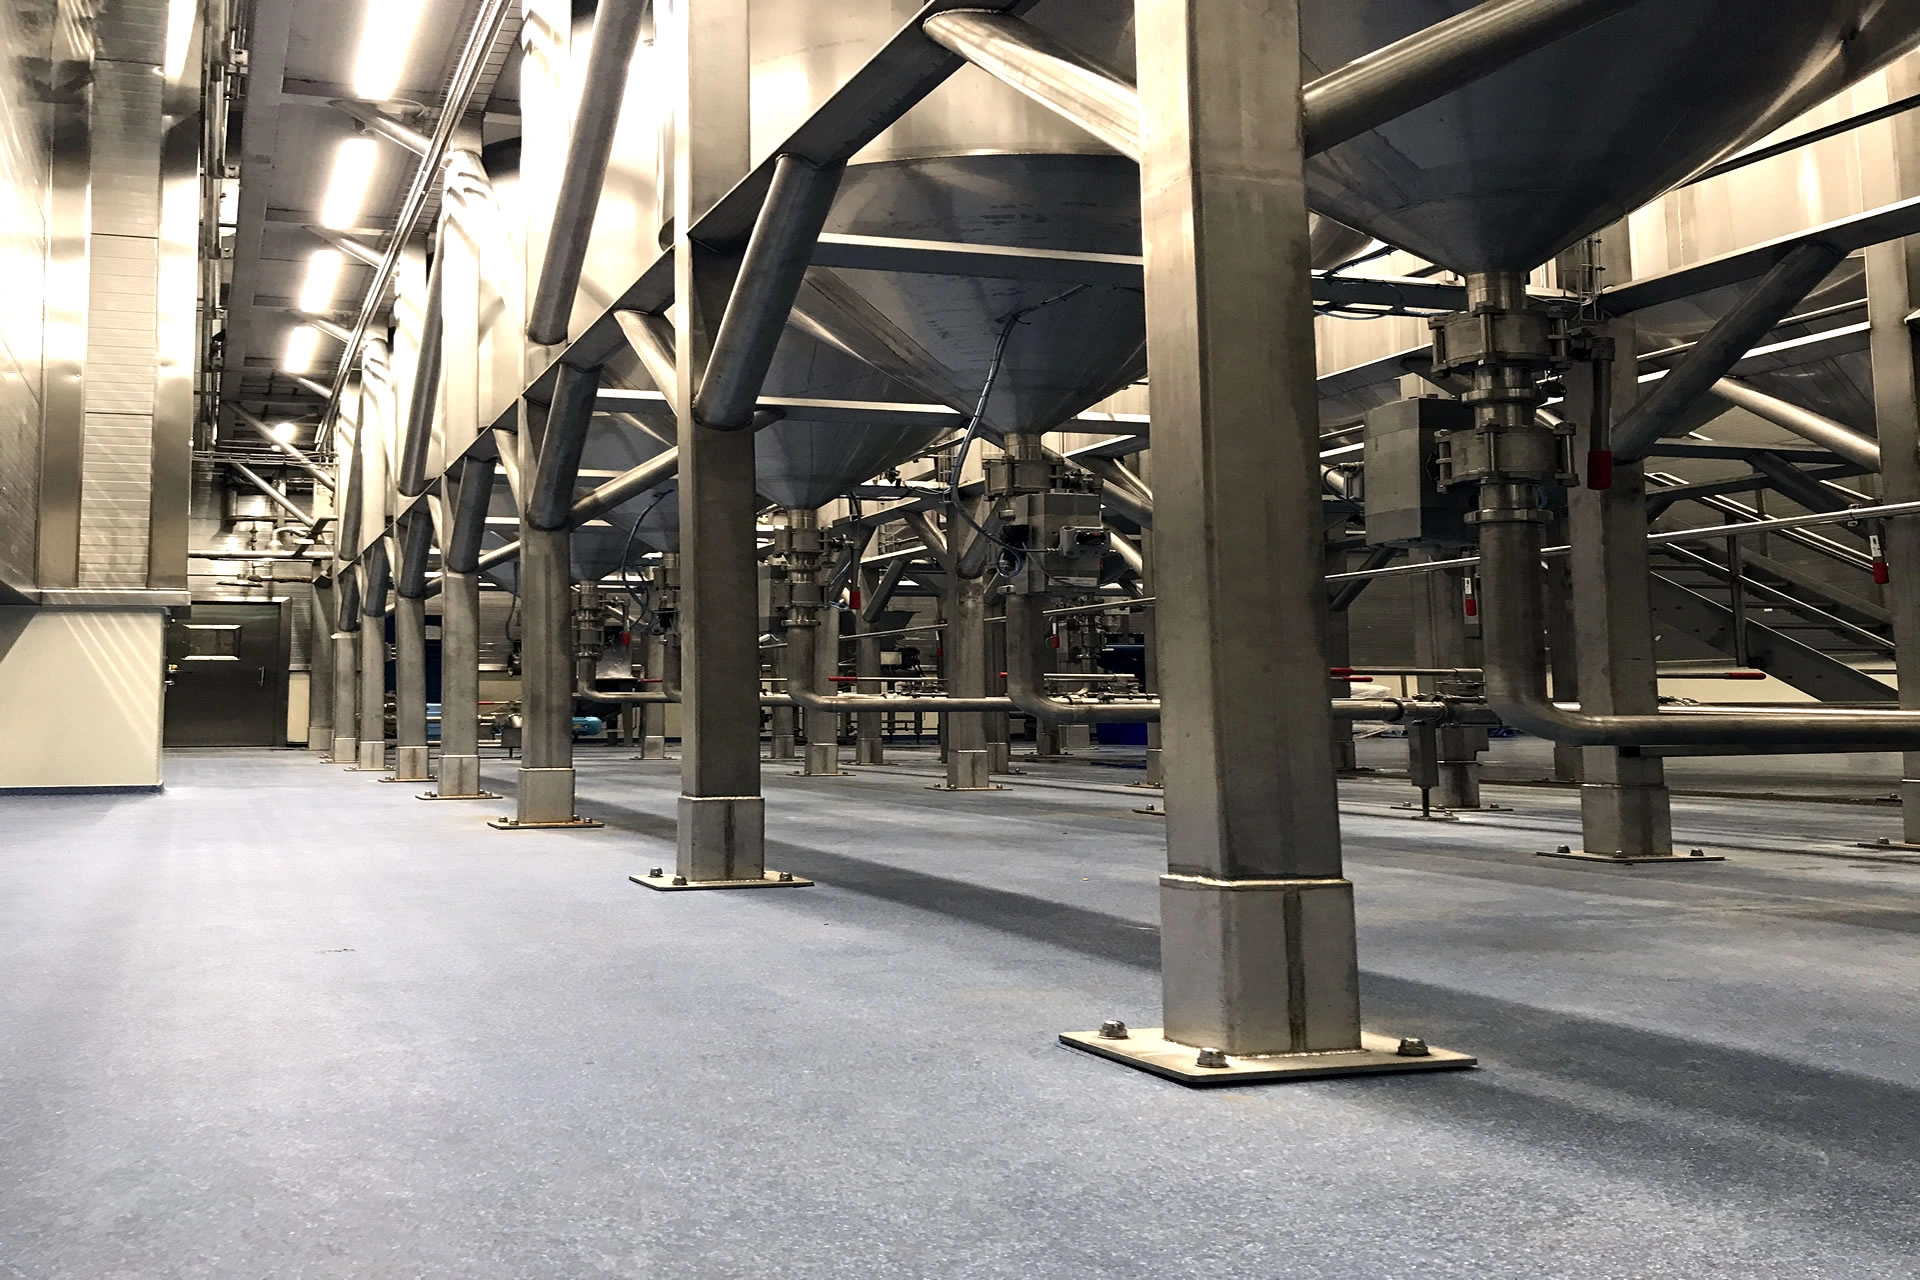 carbon steel and stainless steel platforms